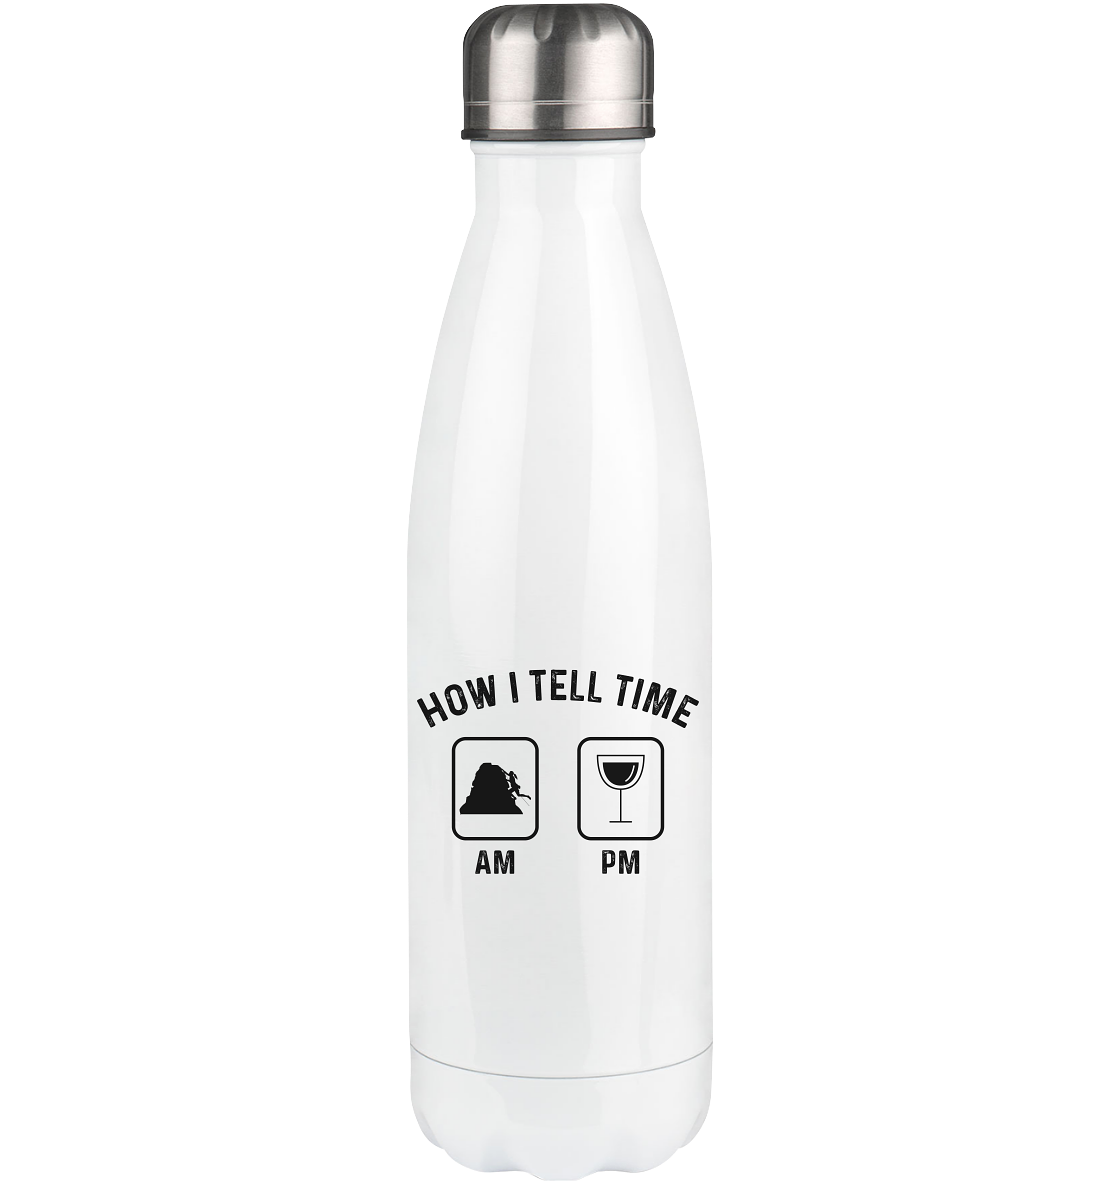 How I Tell Time Am Pm 1 - Edelstahl Thermosflasche klettern 500ml